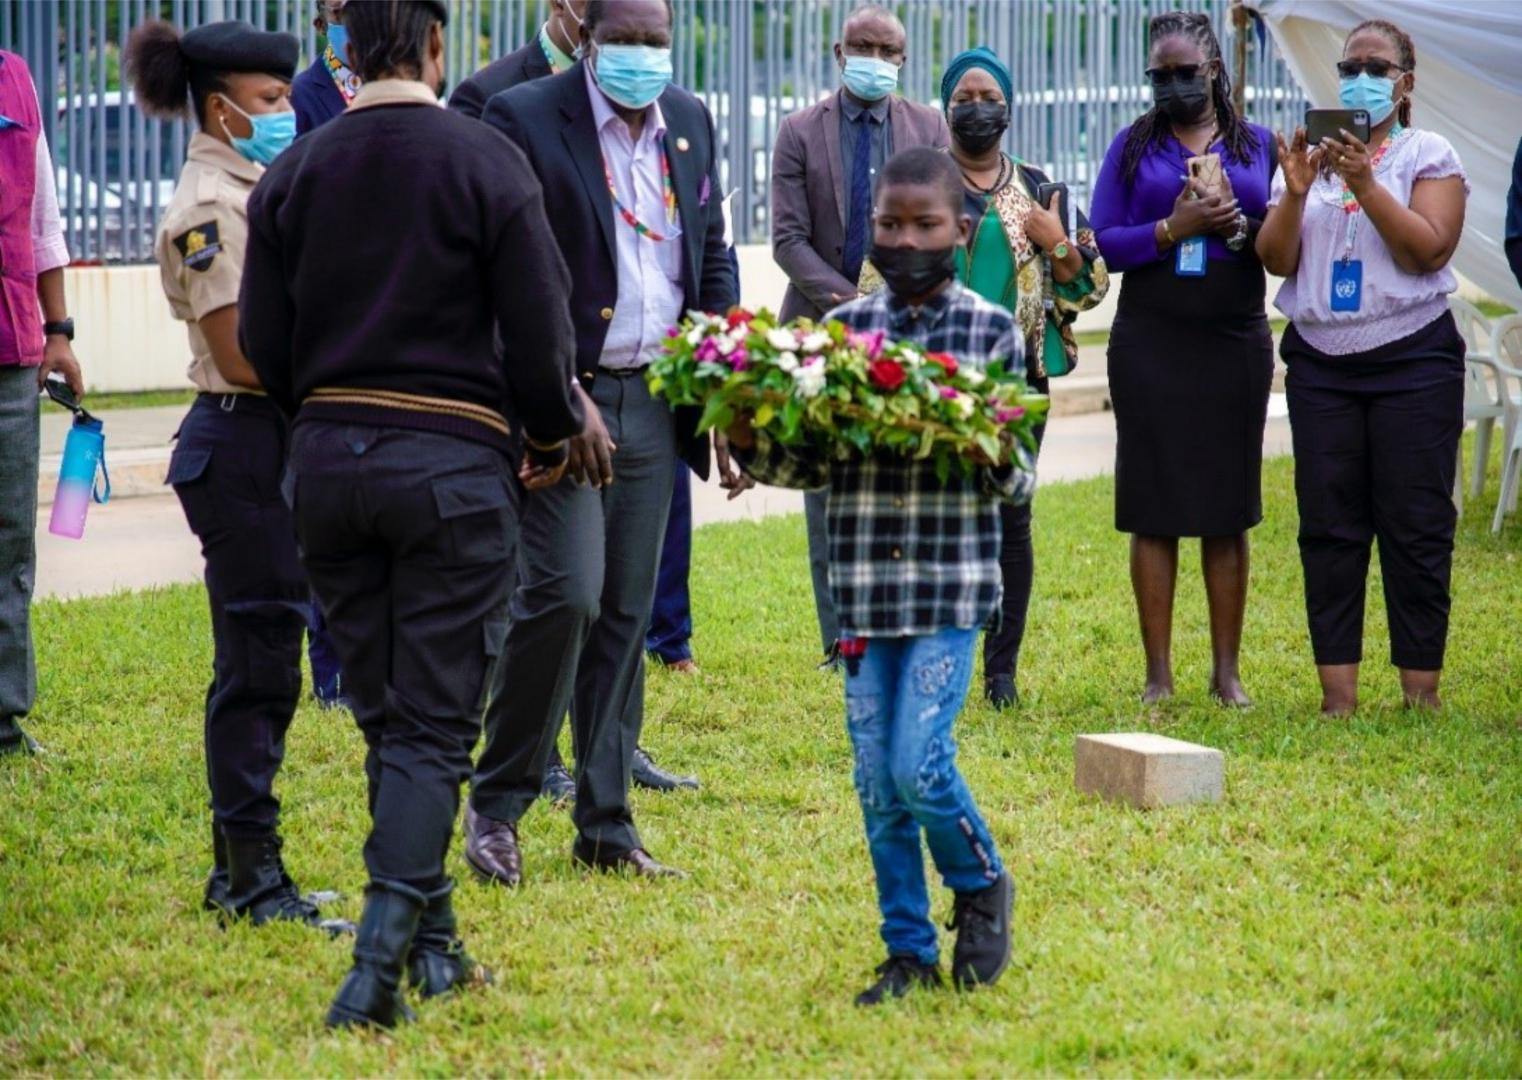 Son of one of the deceased laying wreaths in honor of his father